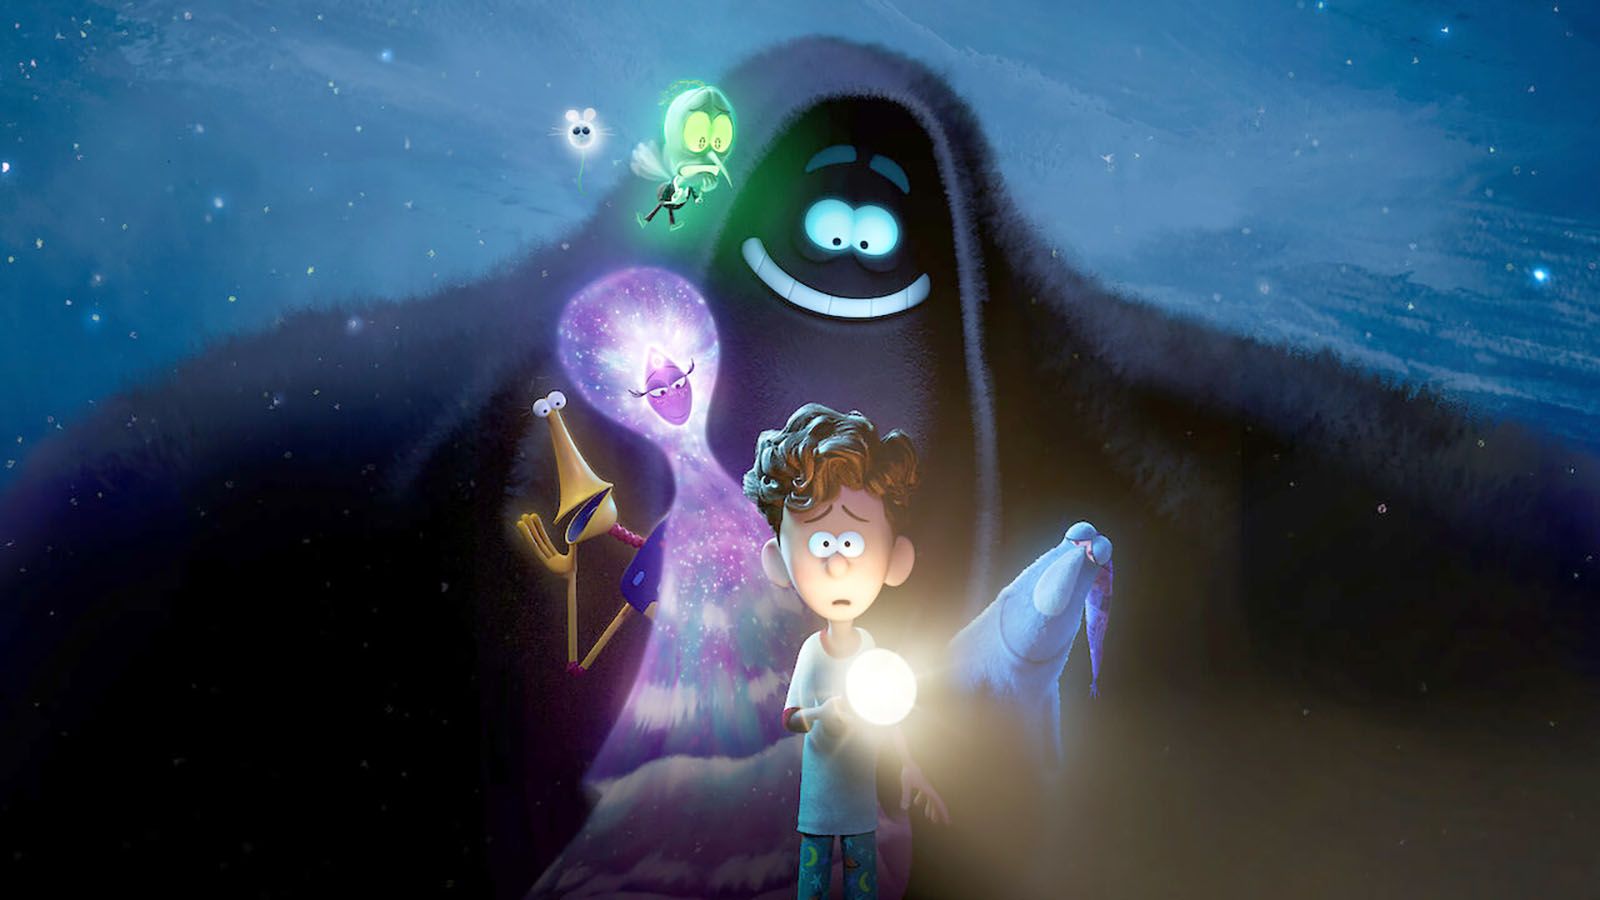 The animated film Orion and the Dark begins streaming on Netflix on Friday, Feb. 2.